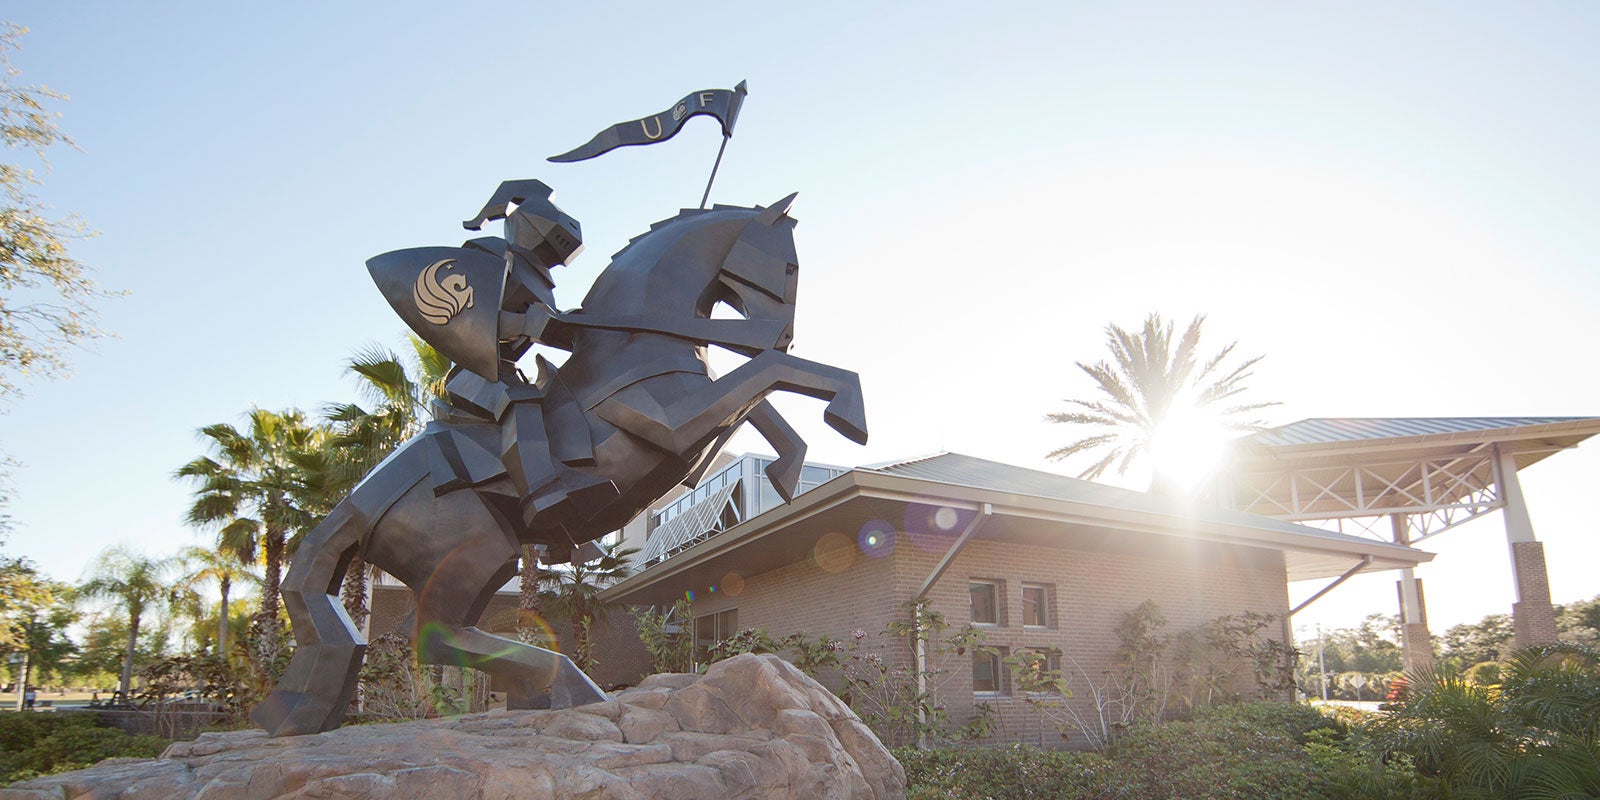 Background Image of 첥 Knight on horseback leading the charge to the future of higher education